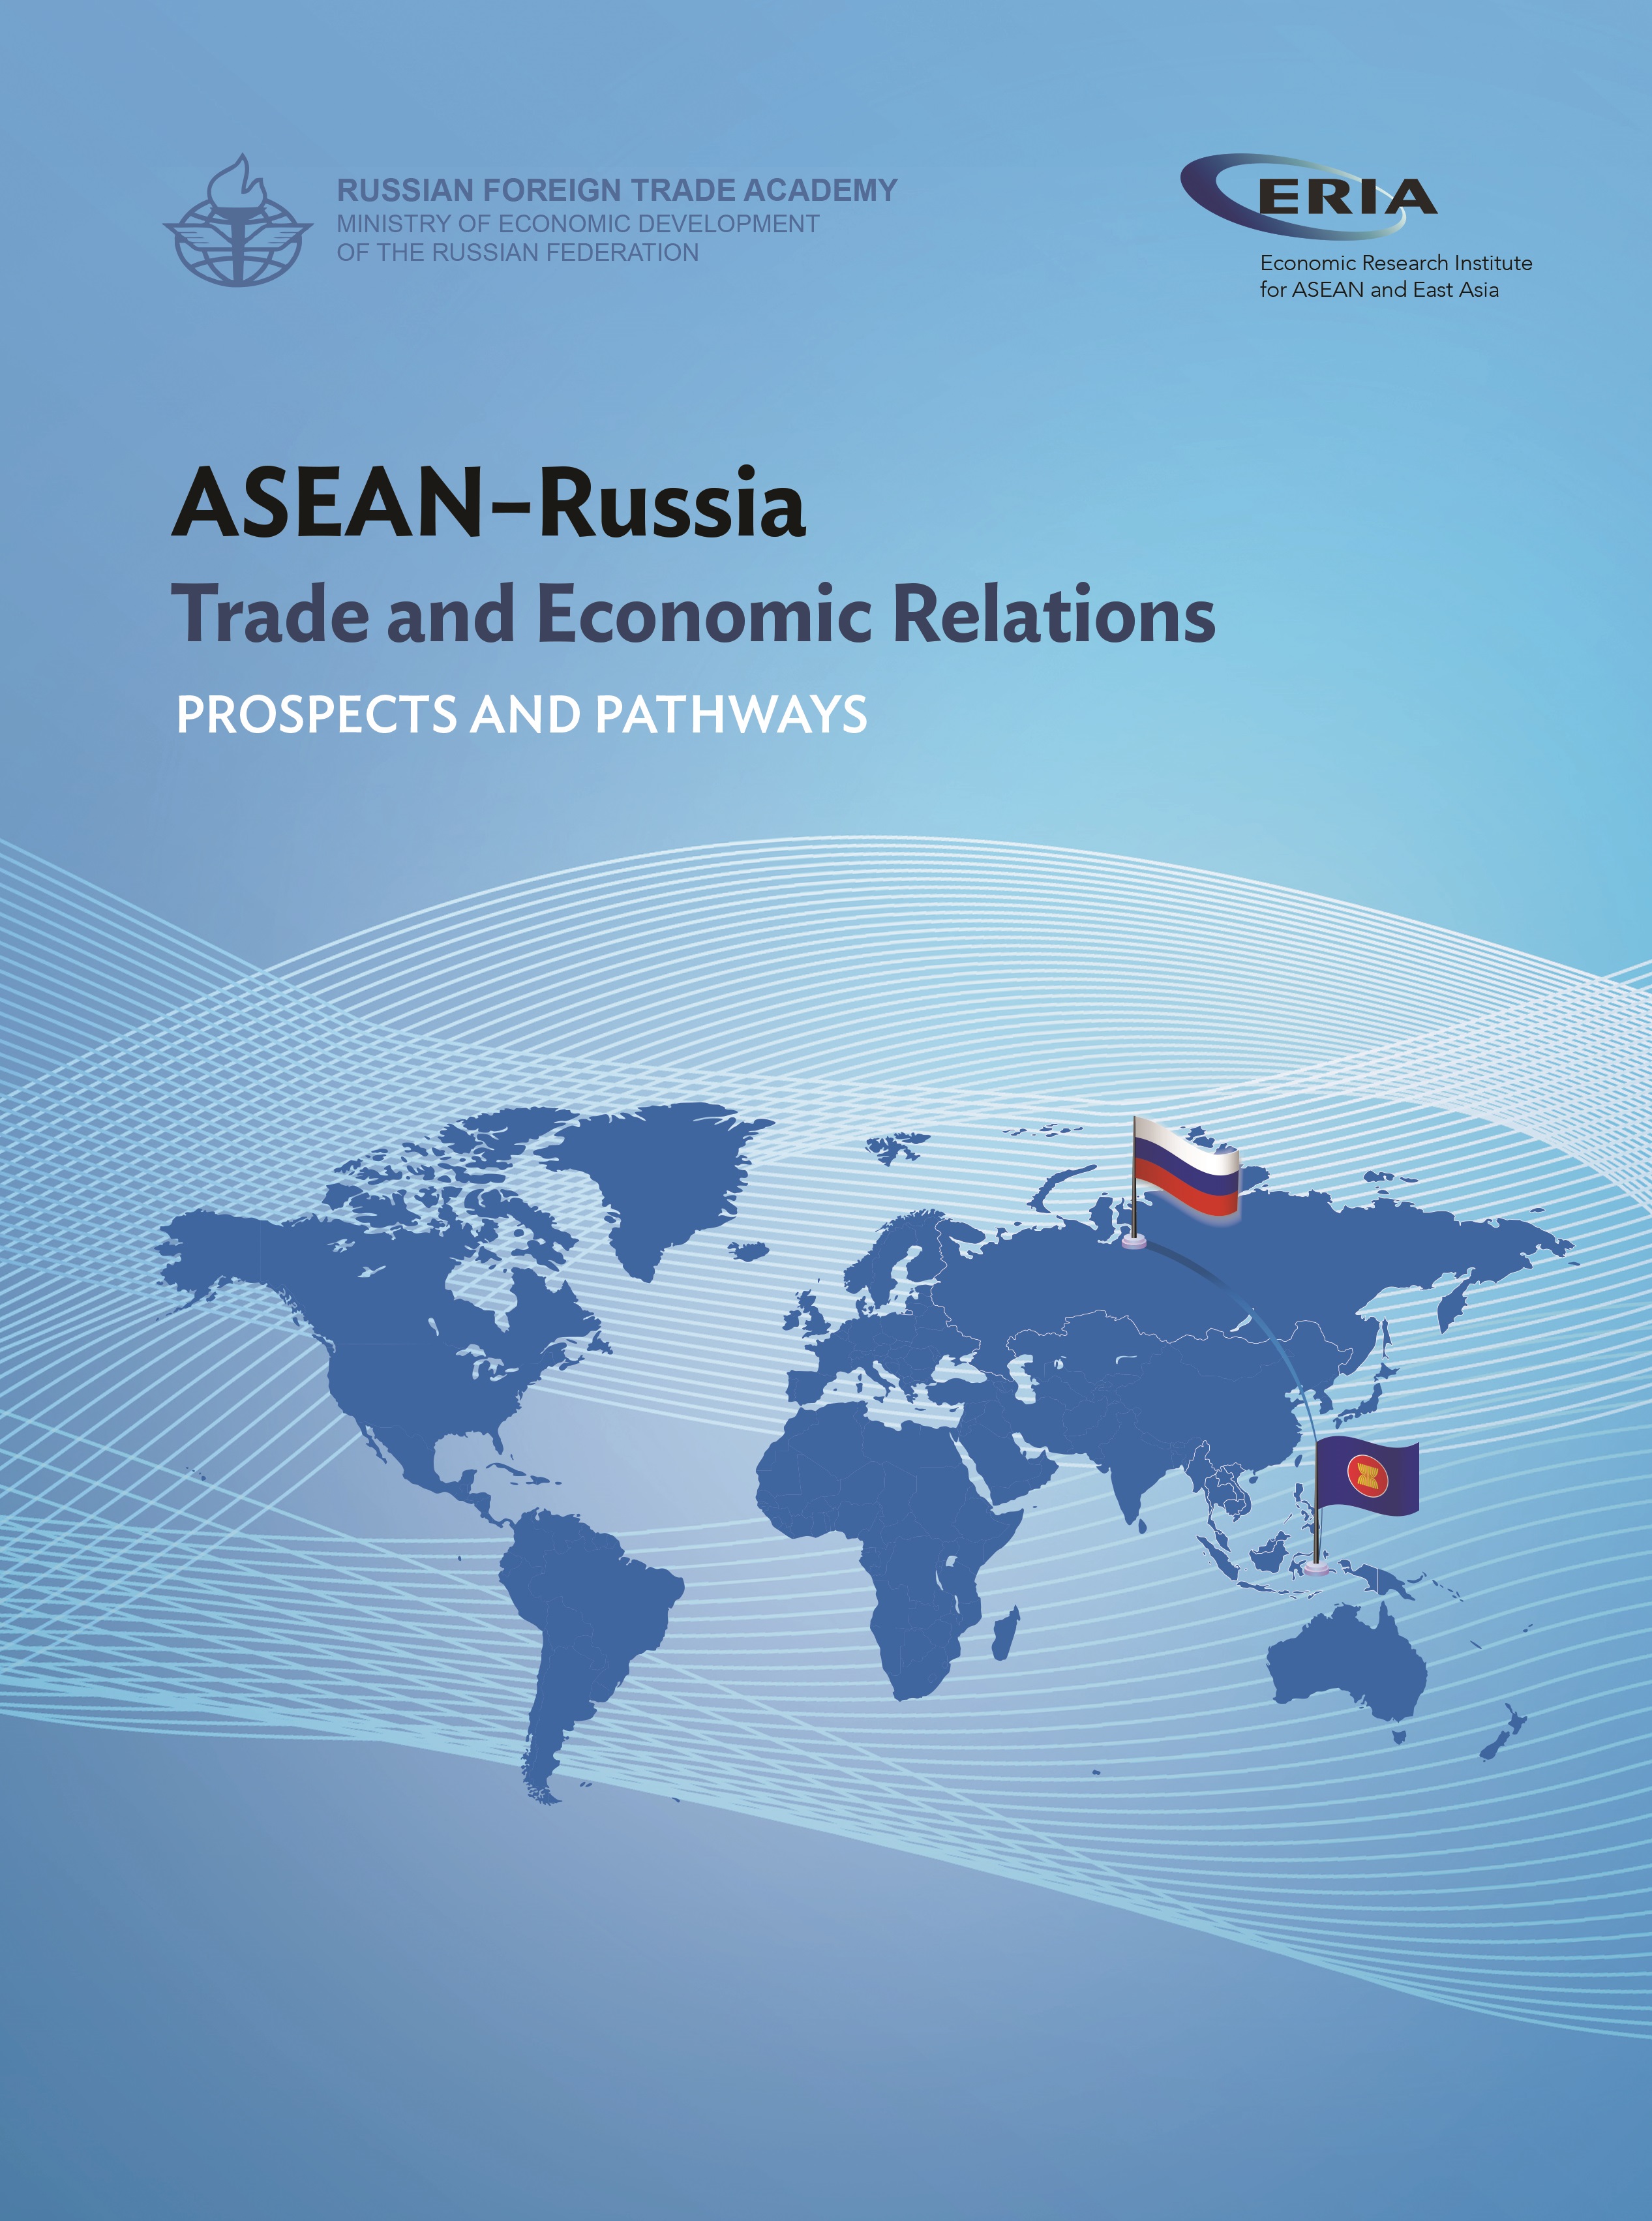 ASEAN-Russia Trade and Economic Relations: Prospect and Pathways